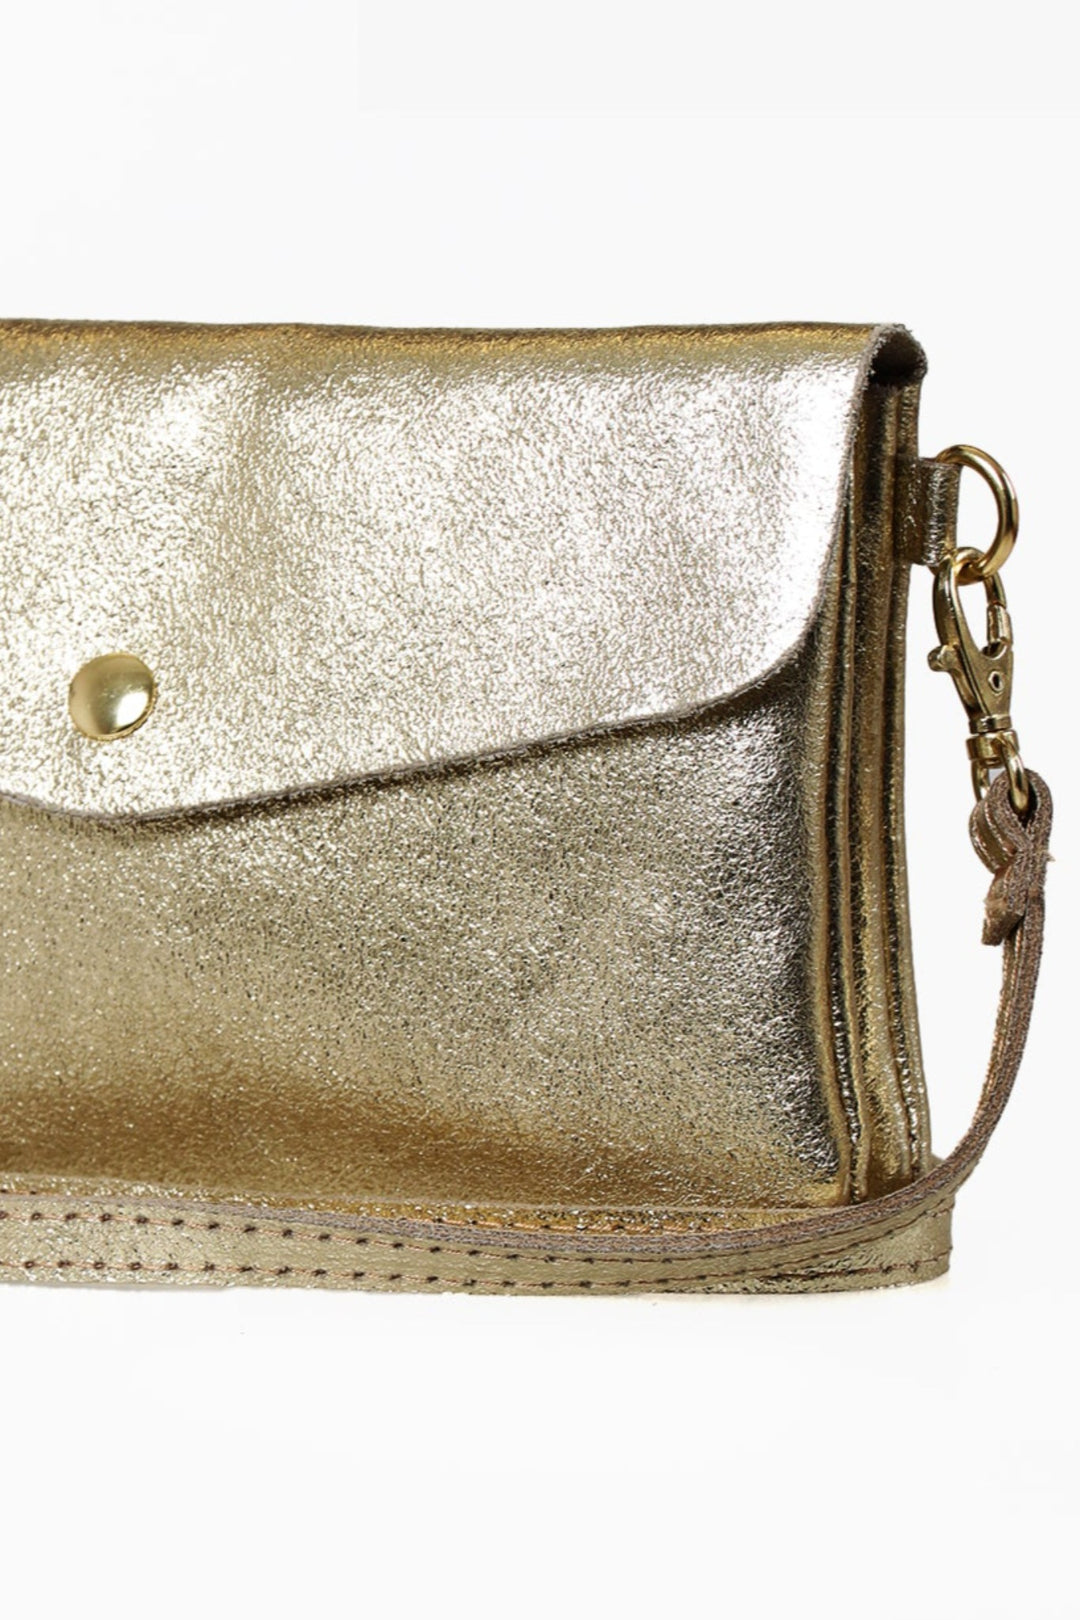 Gold Large Genuine Italian Leather Envelope Clutch